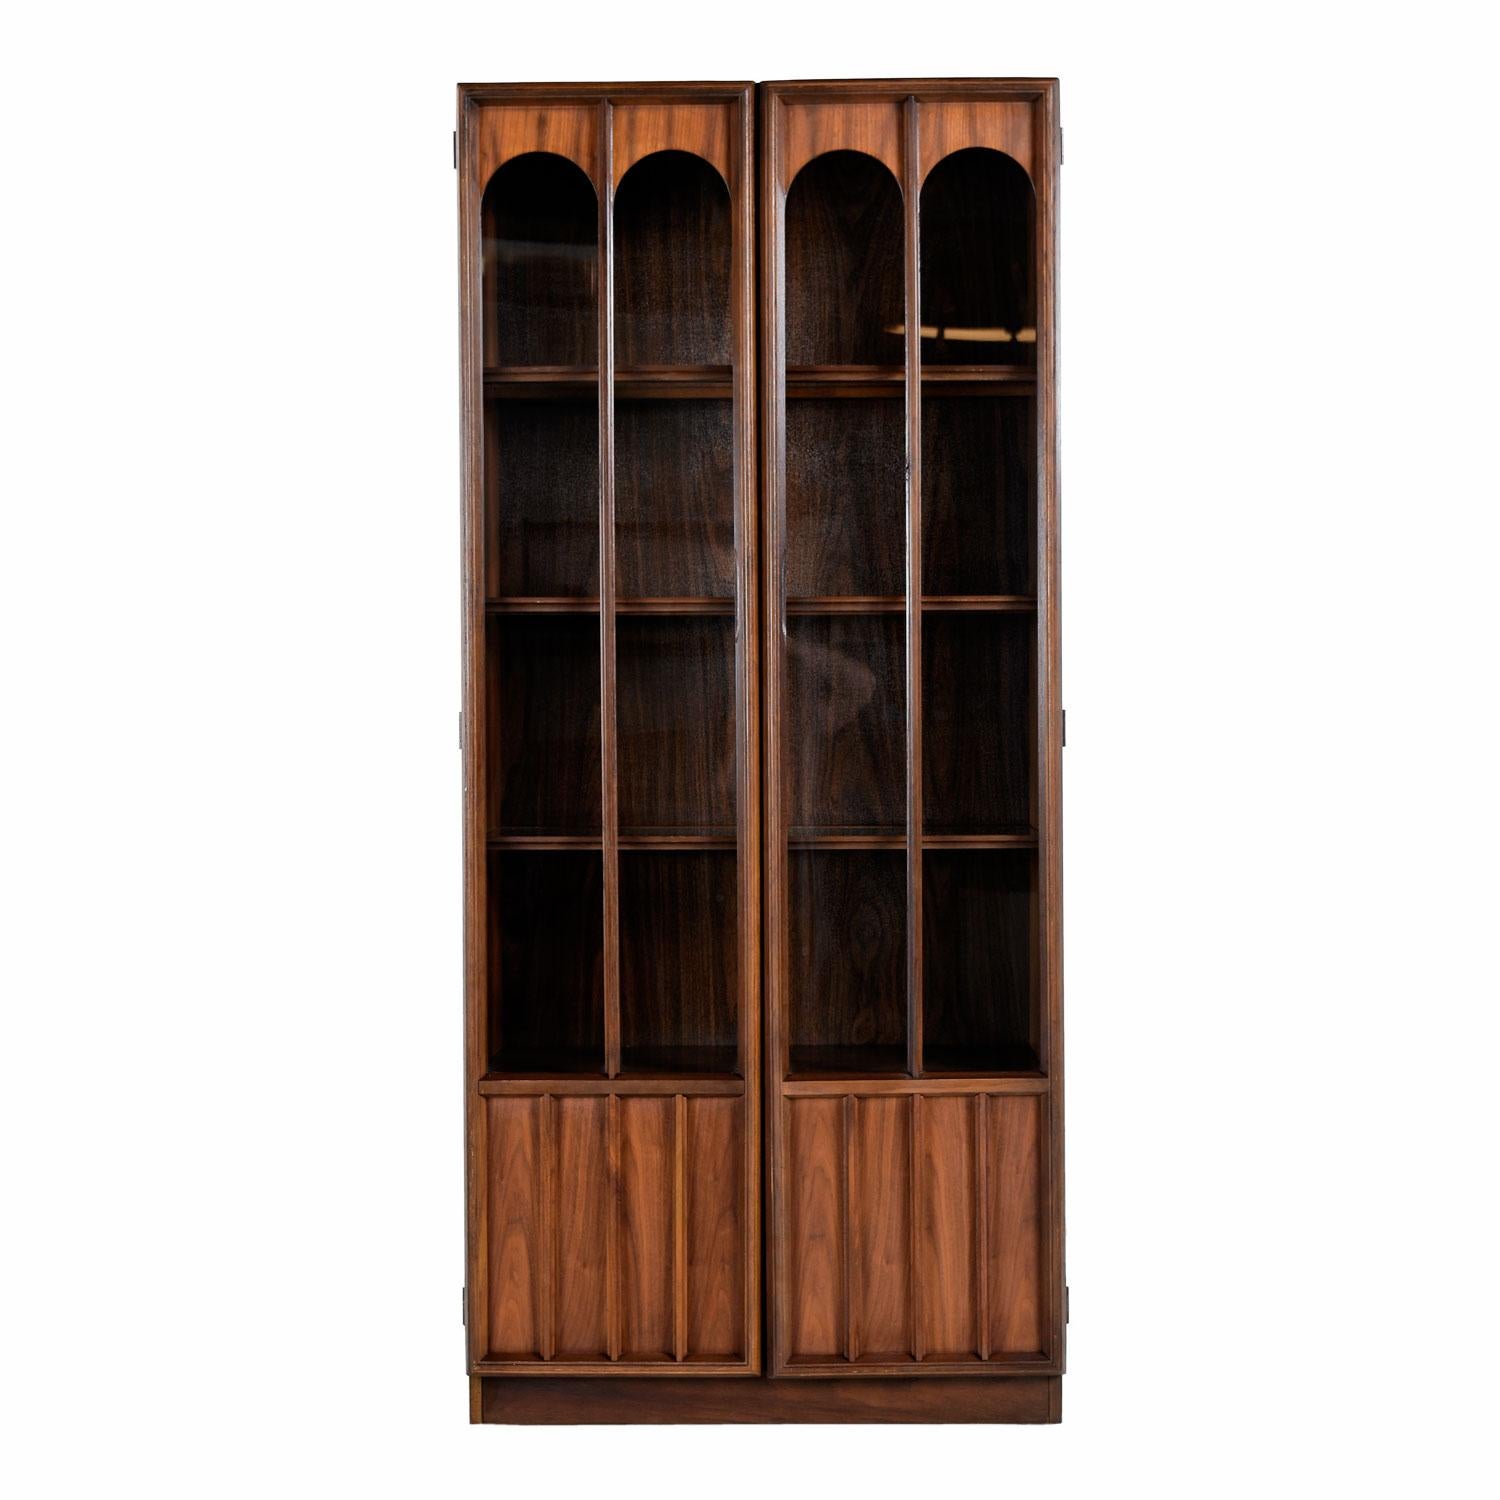 Two available and sold separately. This handsome Mid-Century Modern hutch features a glass display area and covered storage. Exhibit your collectibles or fine china in the lighted glass shelves. Figurines, glass, crystal and china will look amazing